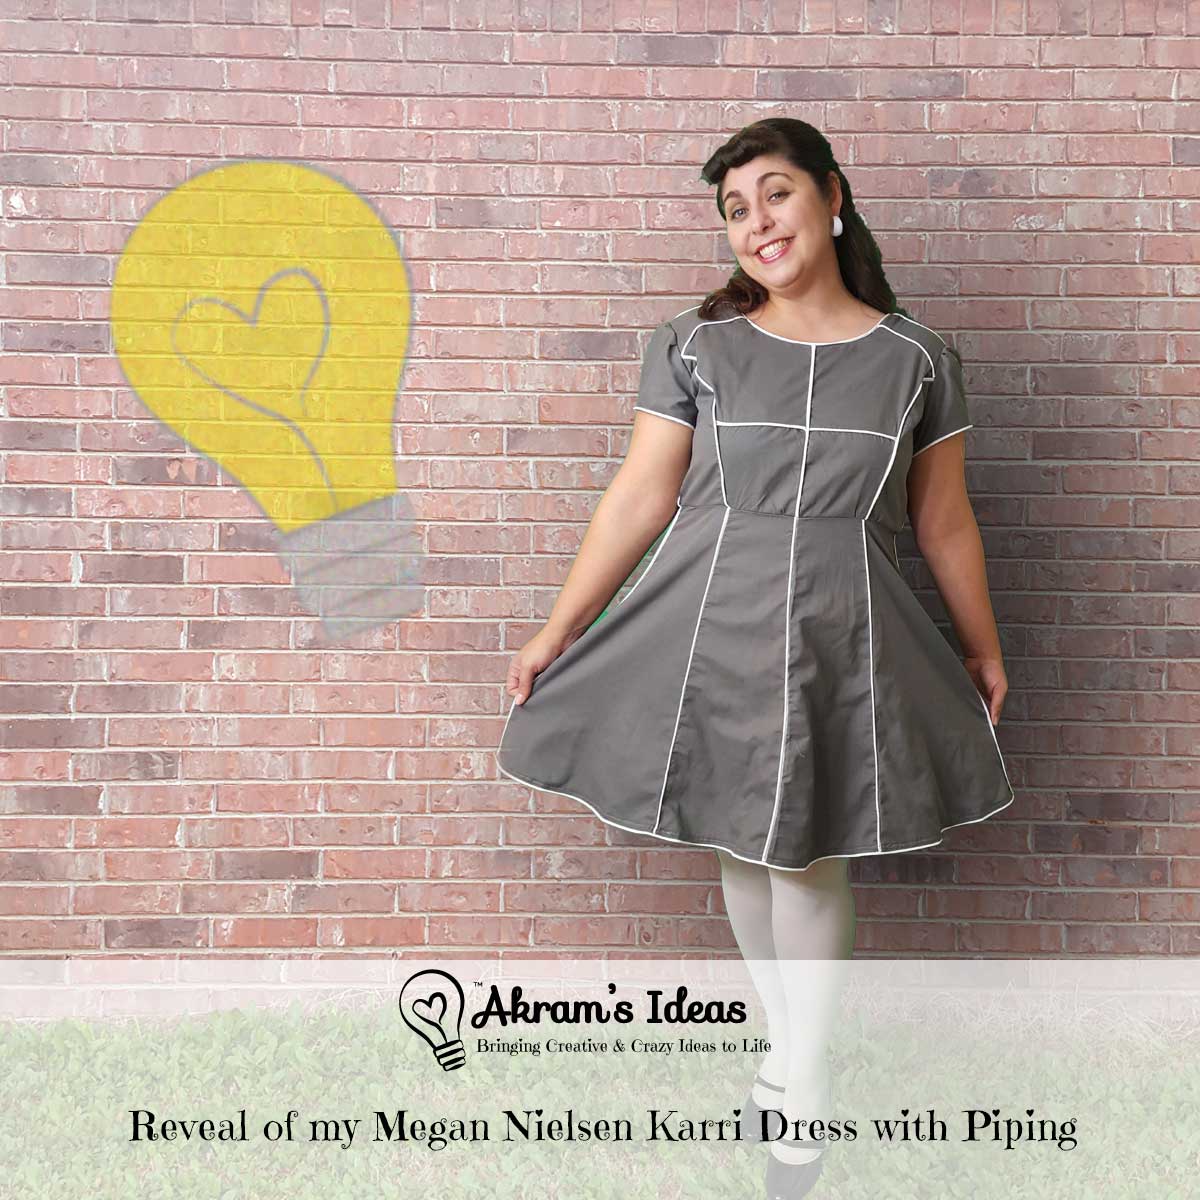 Review of my Megan Nielsen Karri dress pattern featuring multi-panels, a flared skirt and princess seams. Also, the dress in which I used a whole lot of piping.